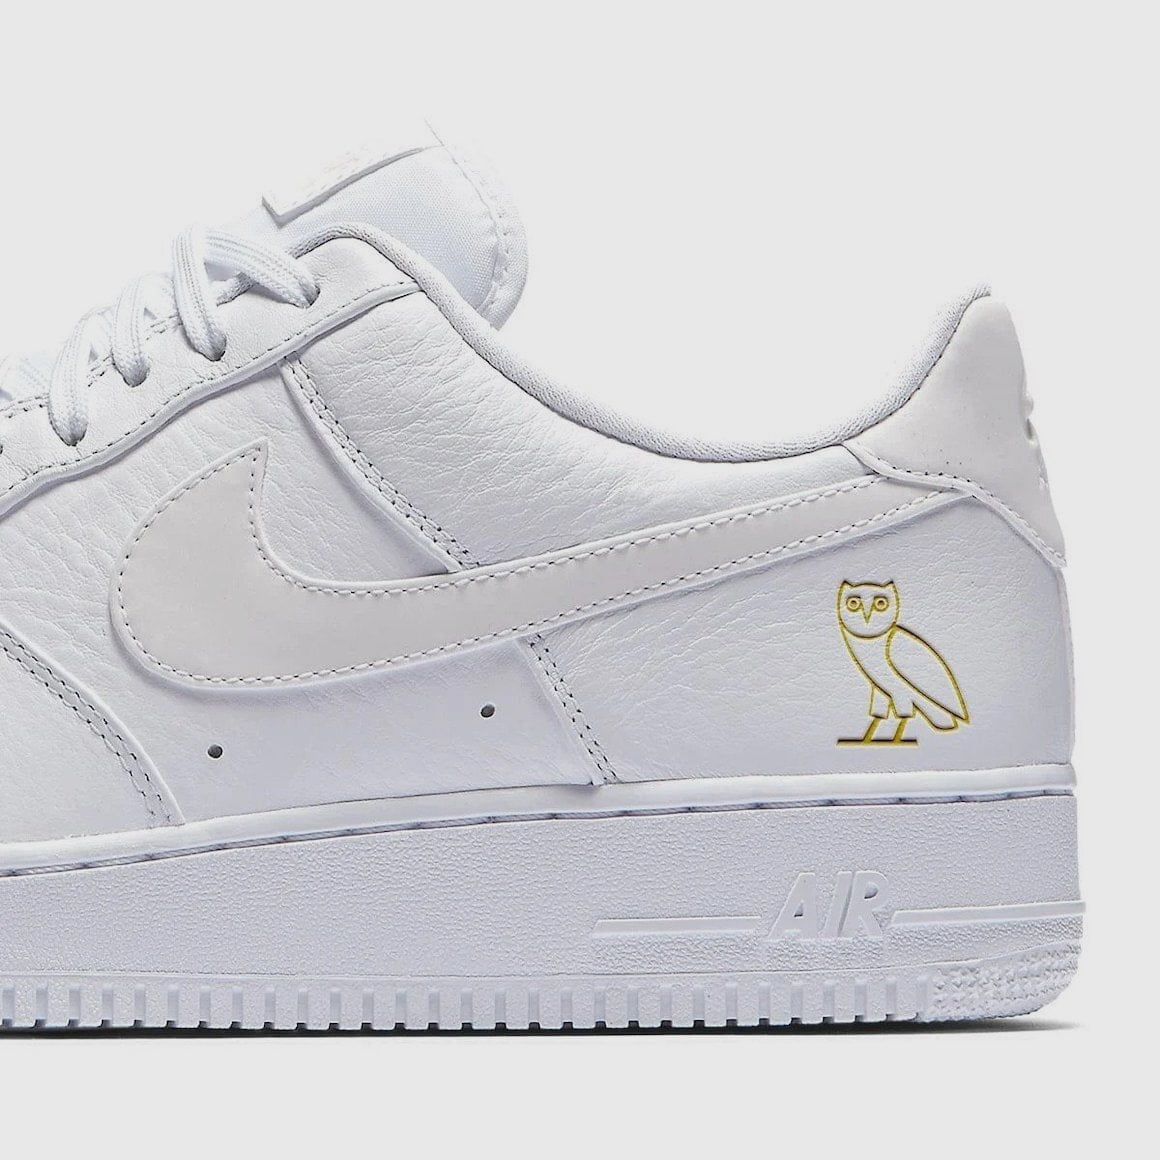 An OVO x Nike Air Force 1 Could Be on 